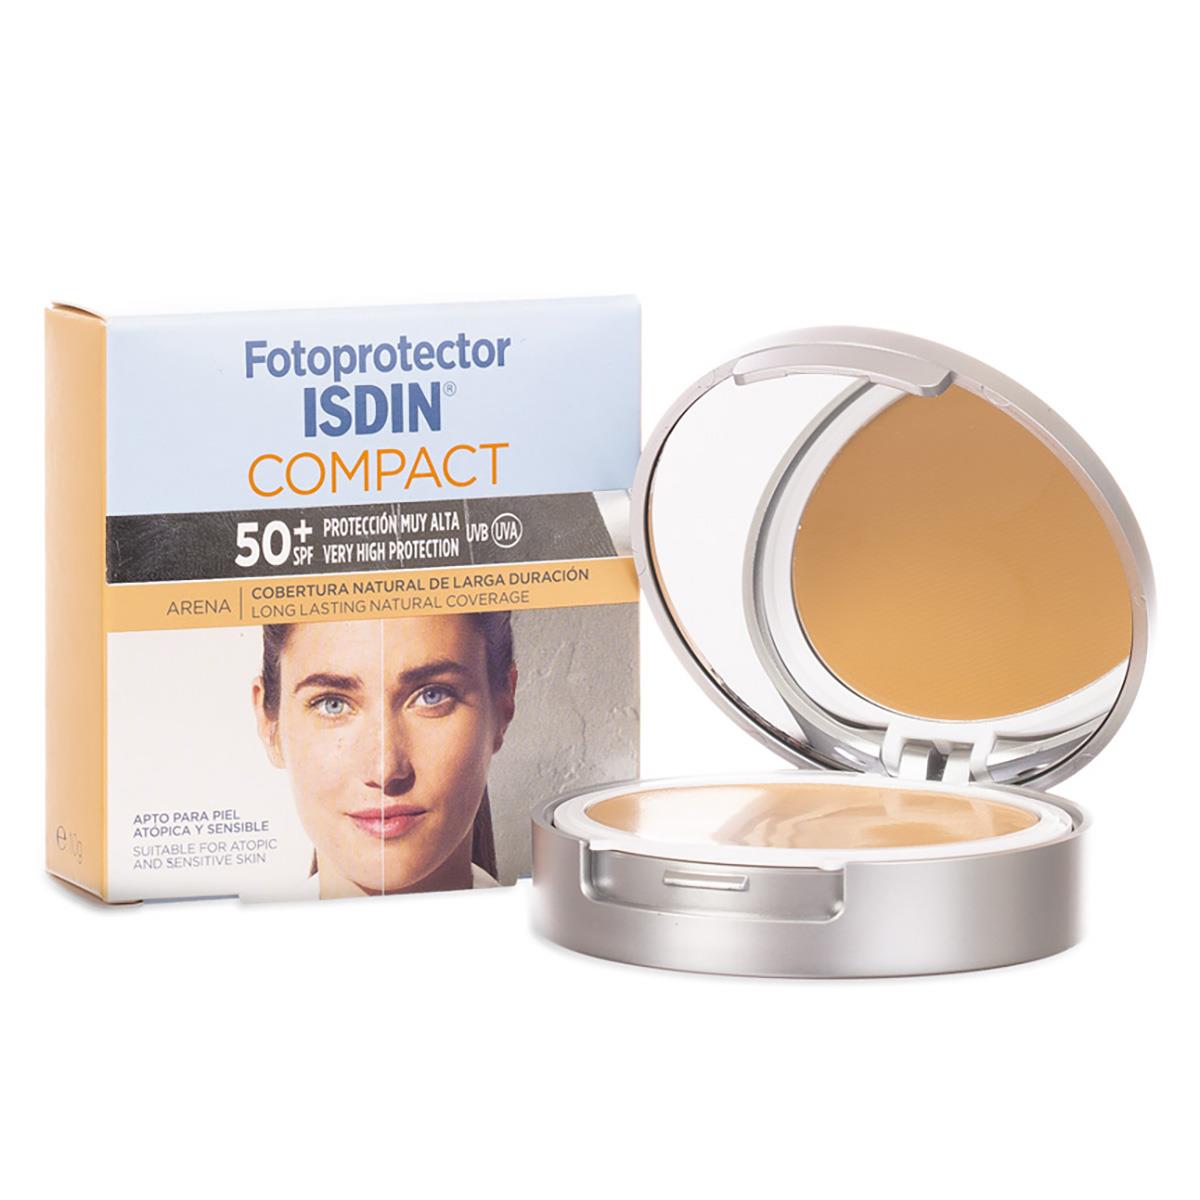 Fotoprotector ISDIN Compact 50+